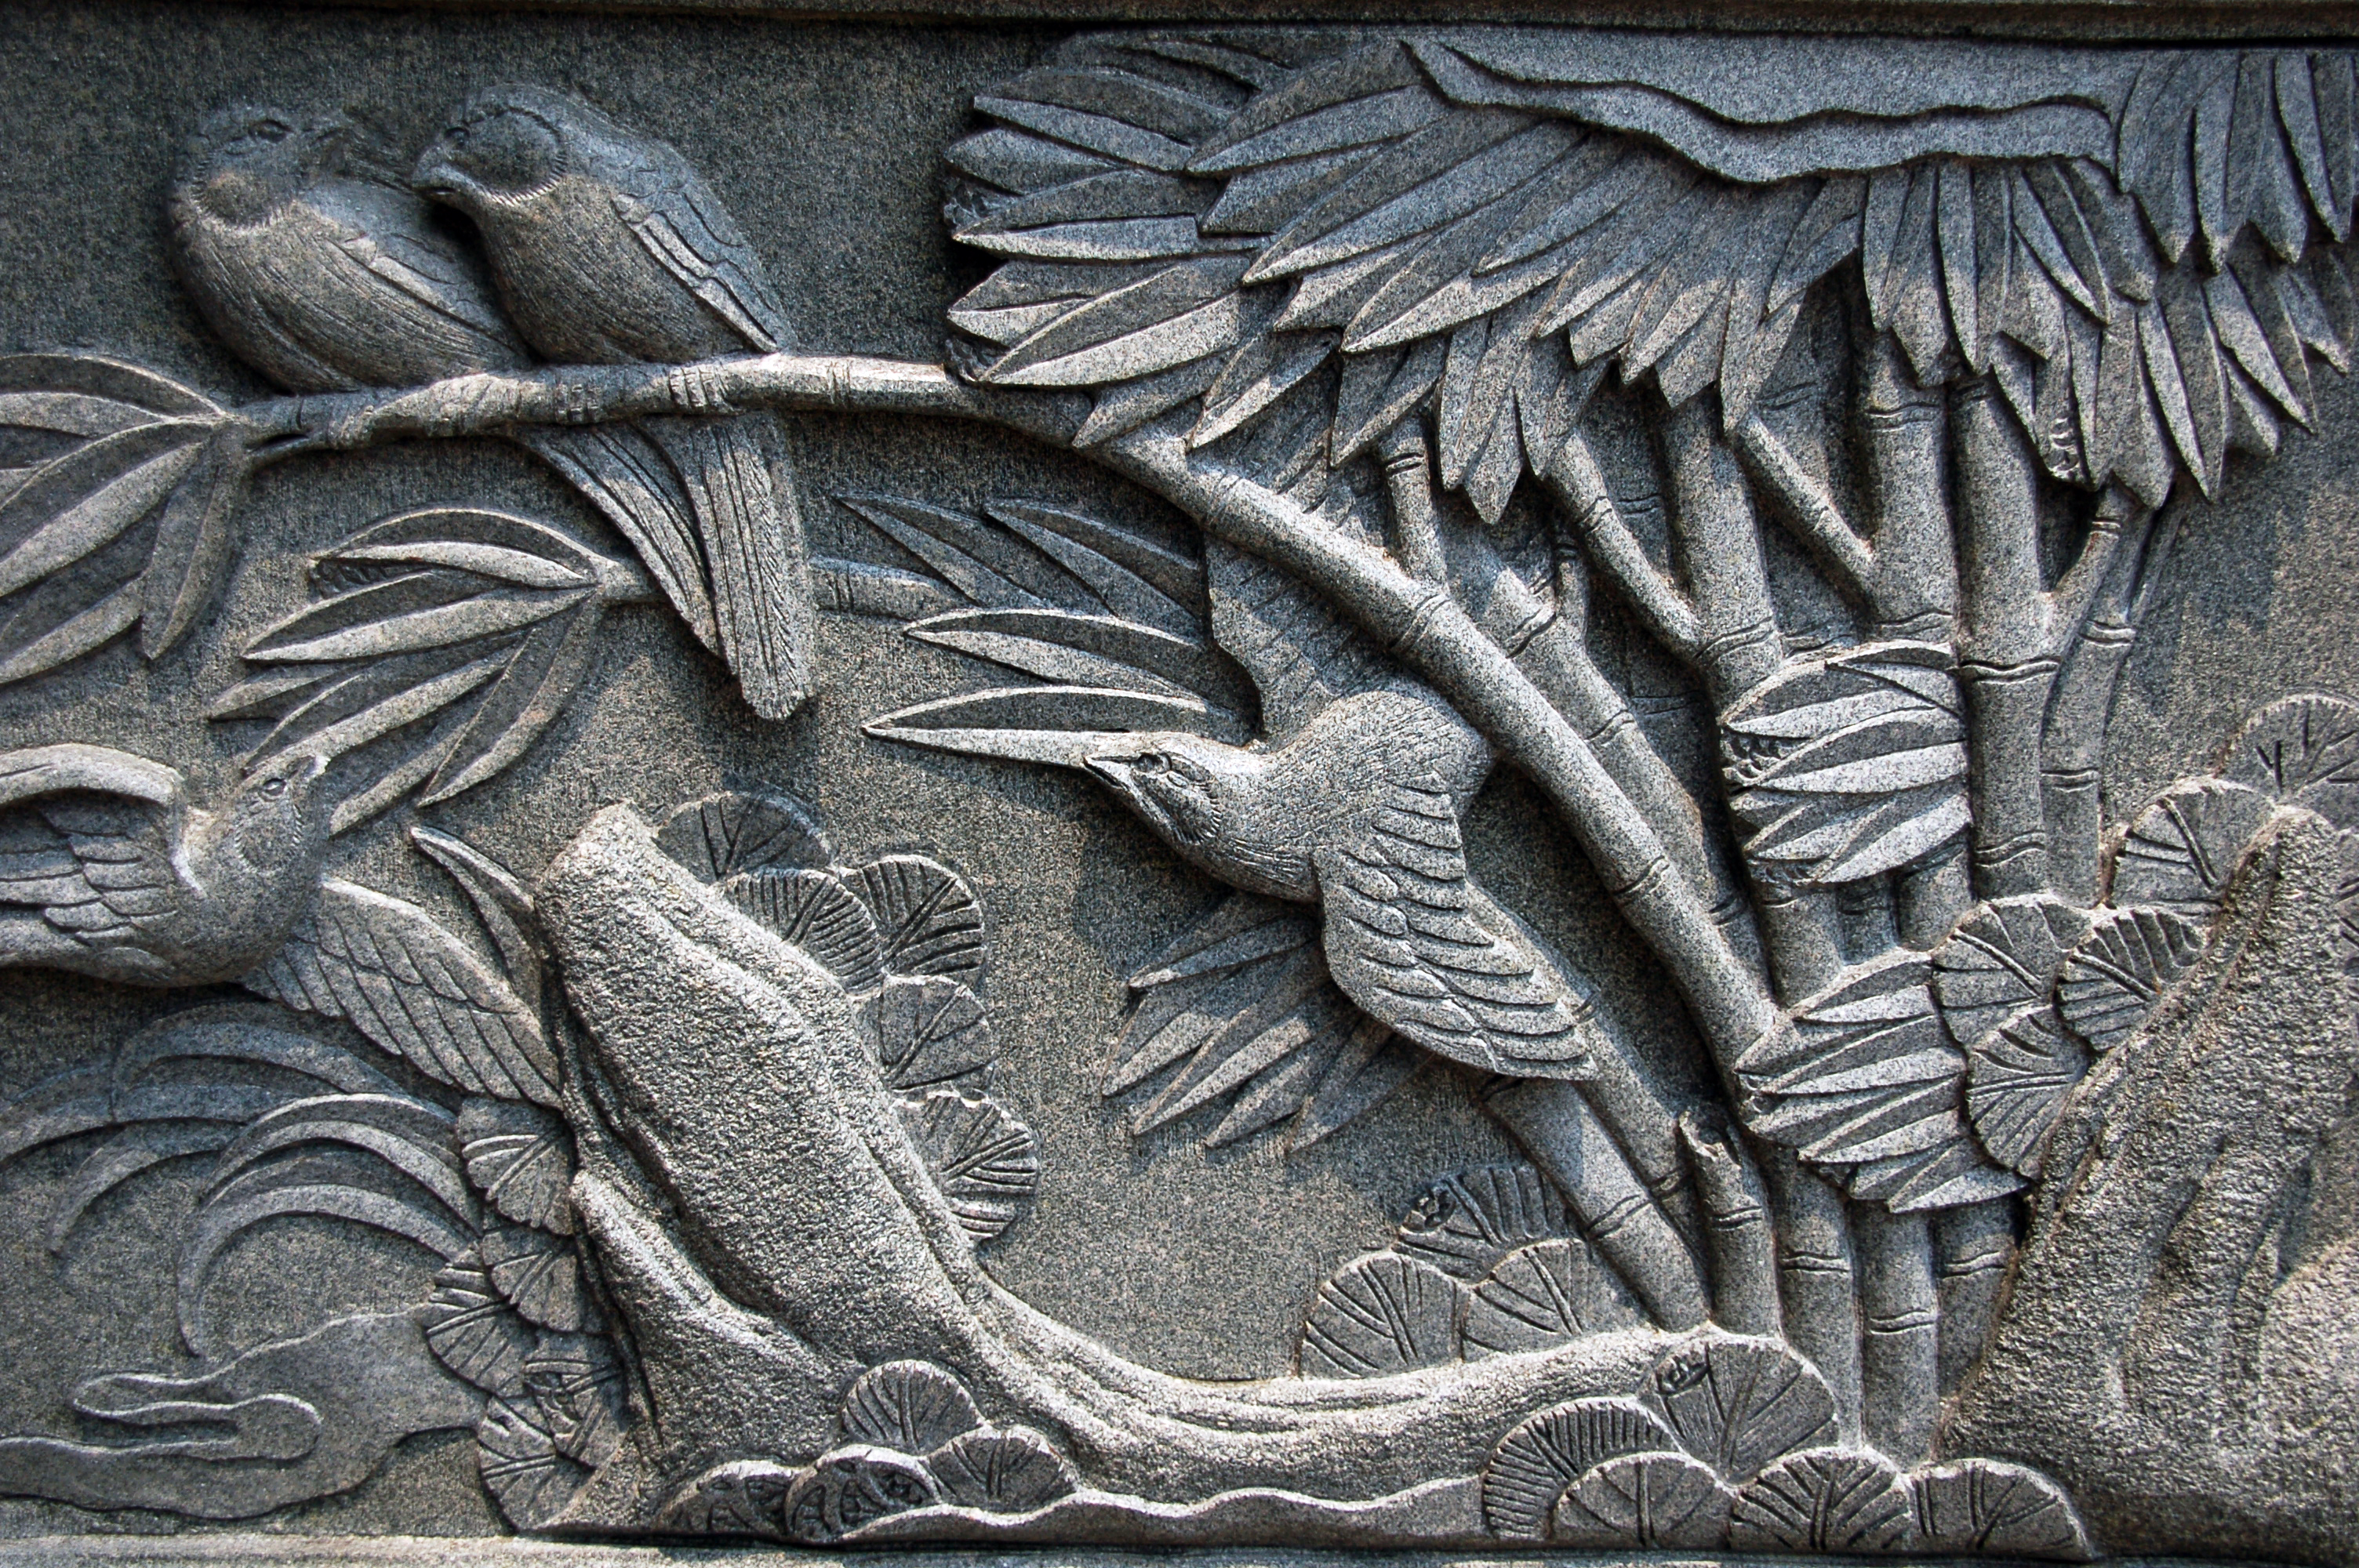 File:Birds on branches stone wall art.jpg - Wikimedia Commons